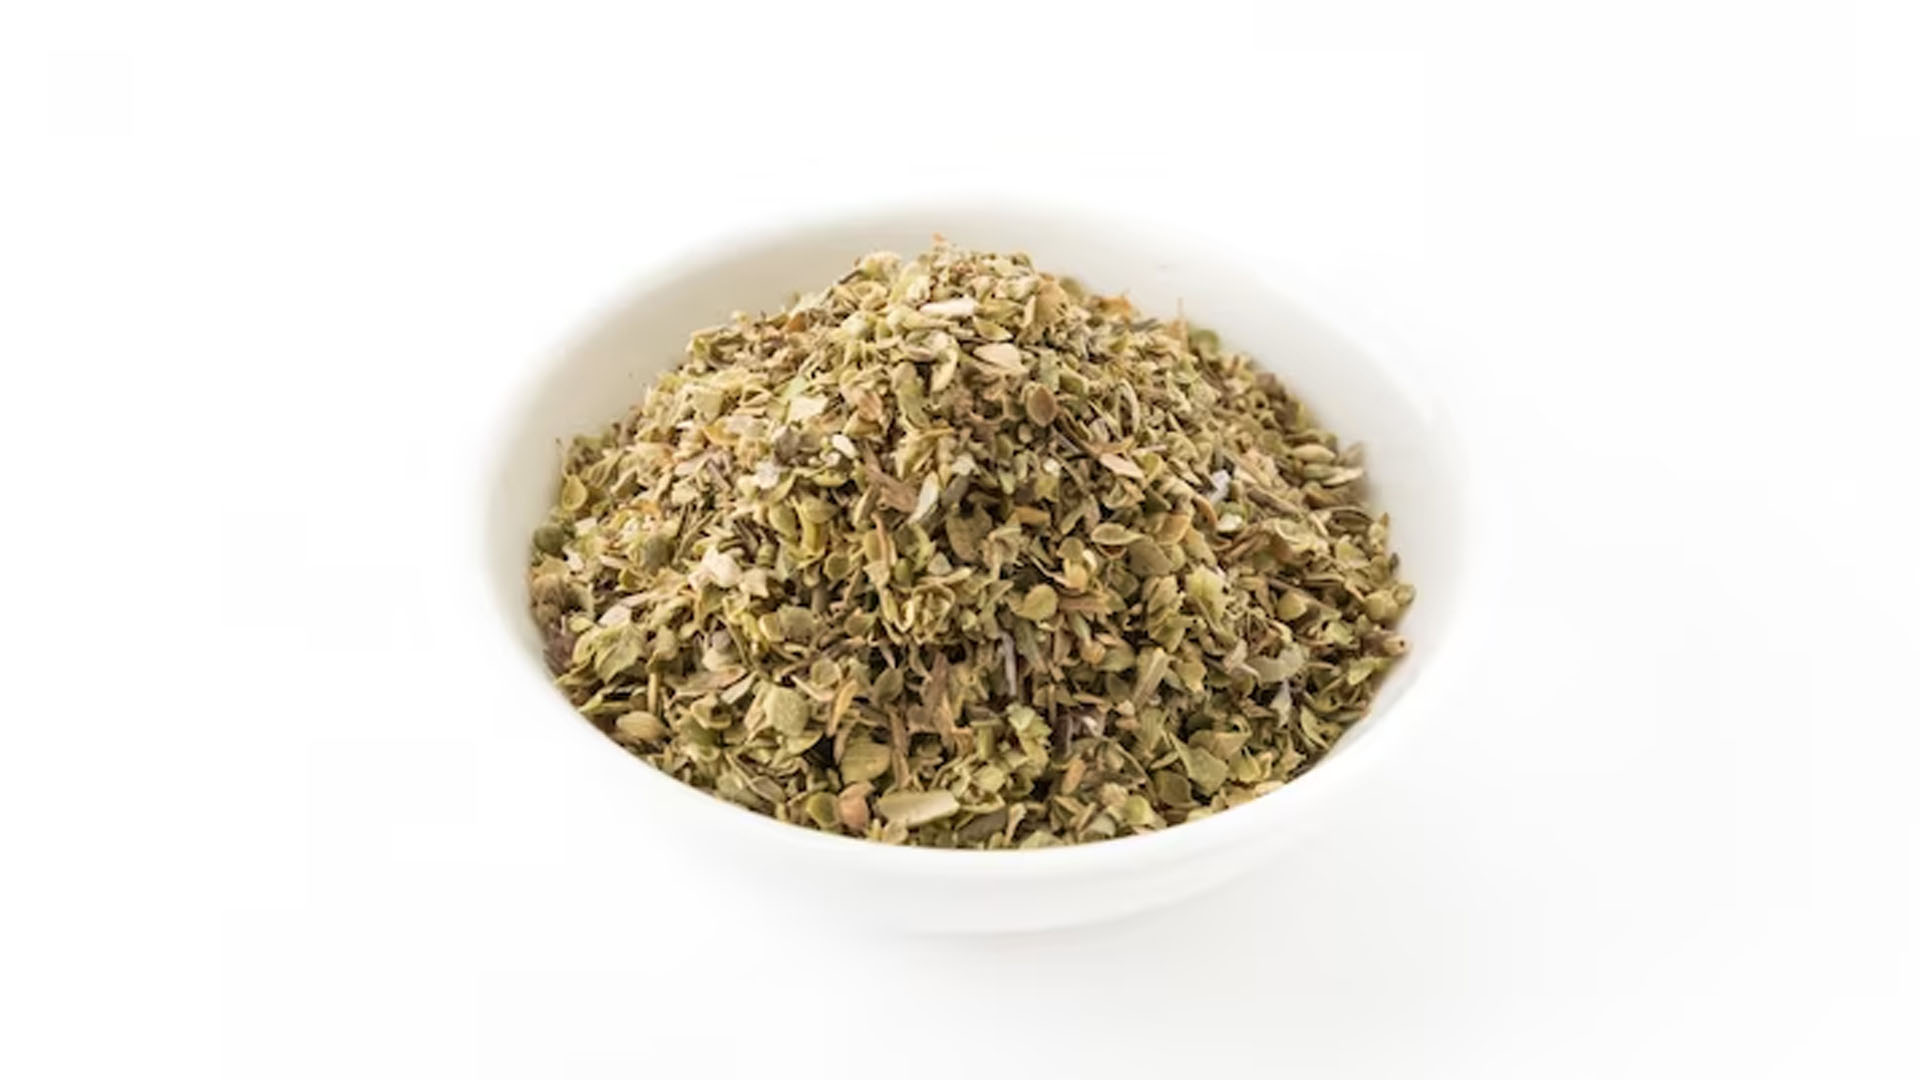 Does Dried Oregano Have Health Benefits?